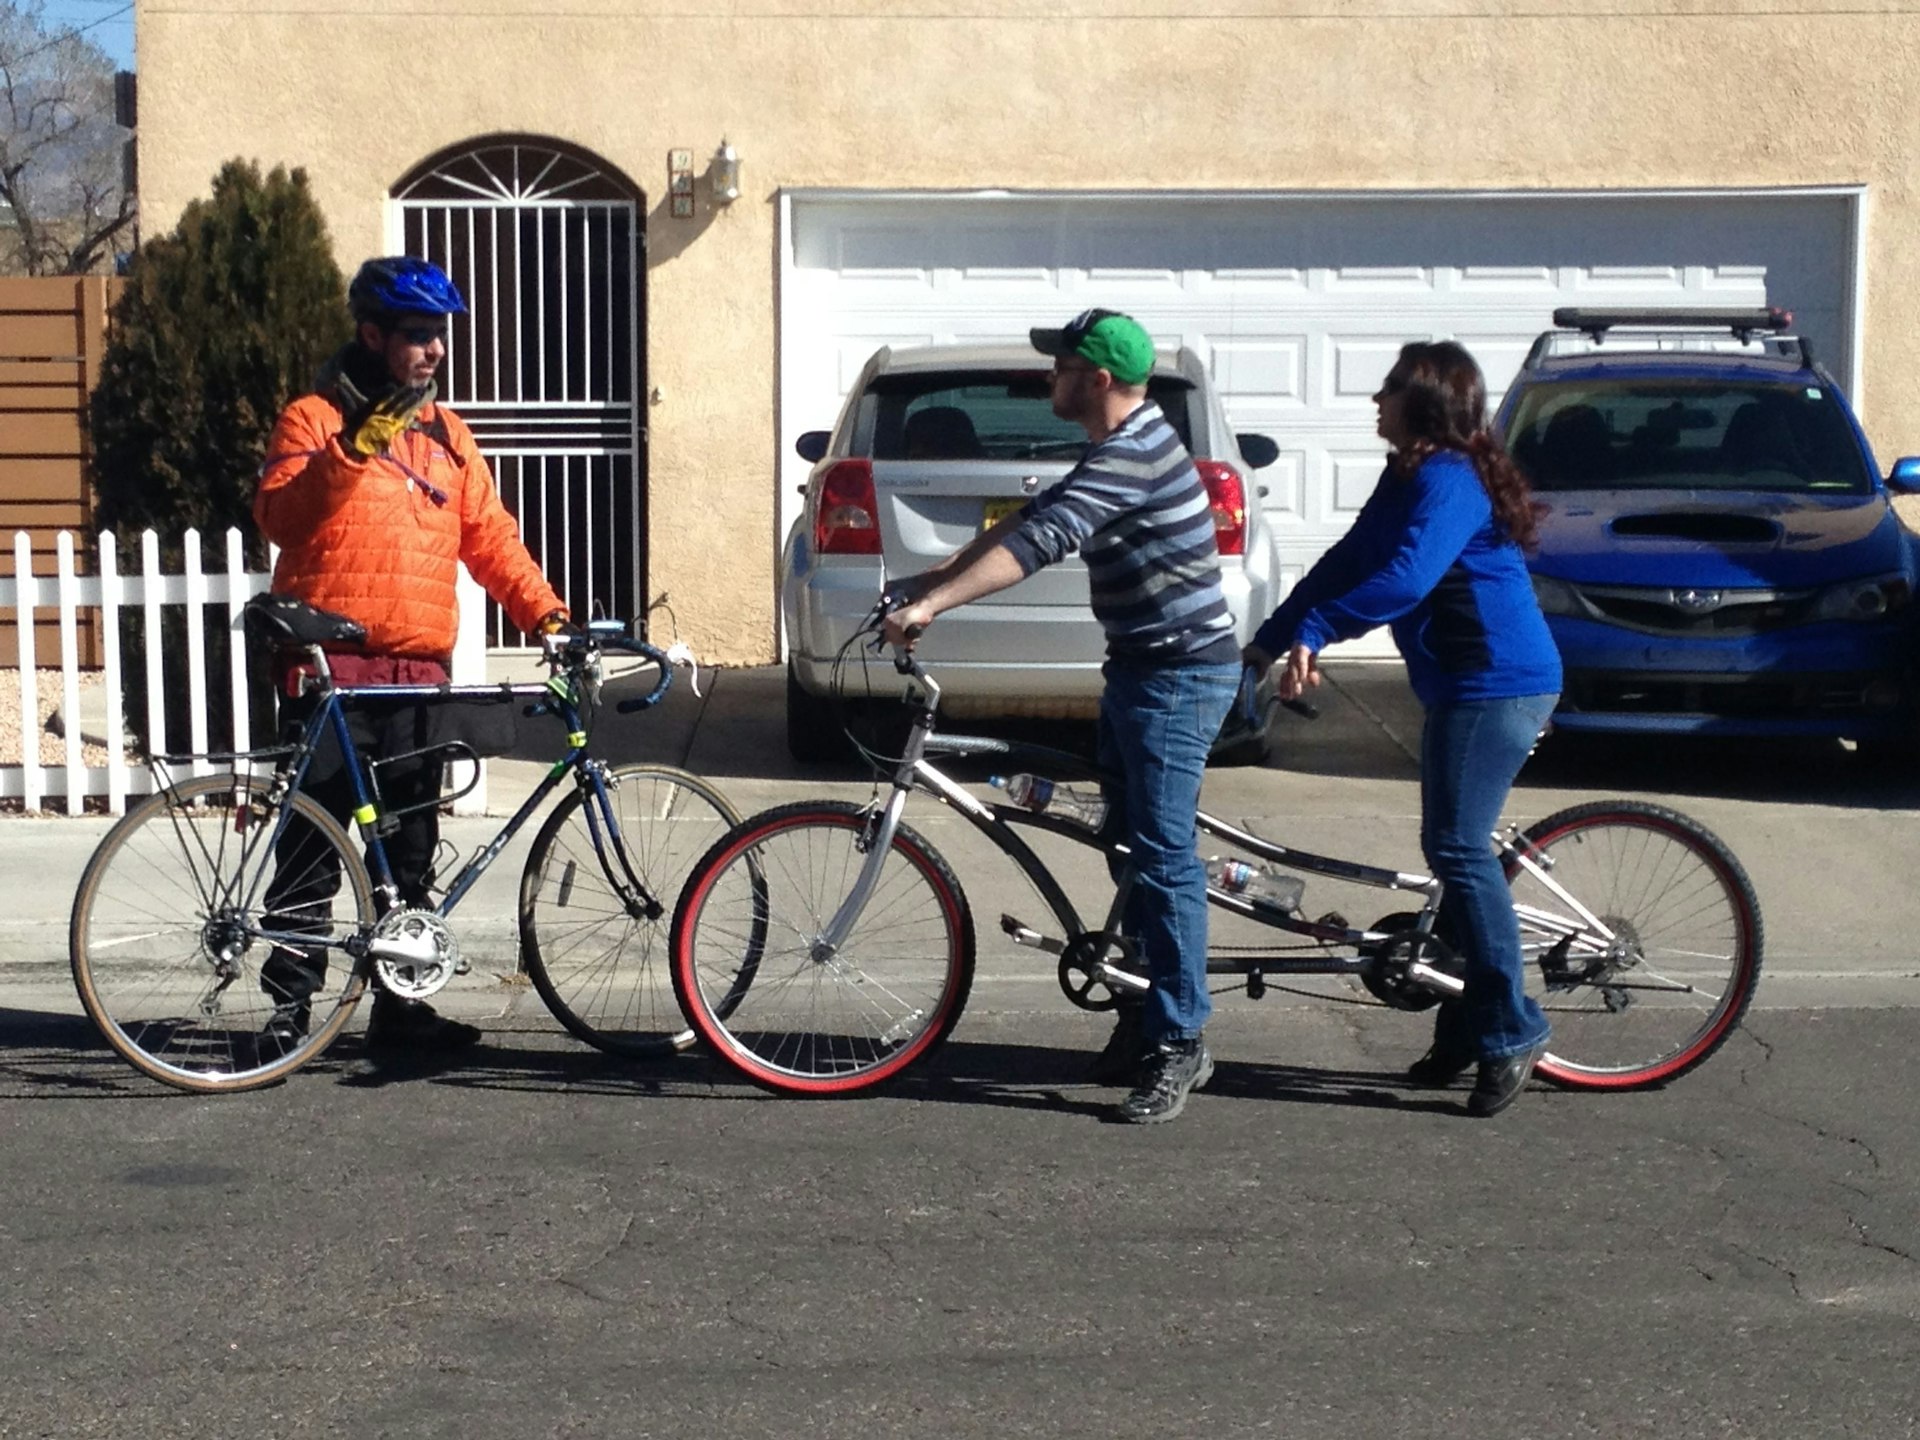 A man with a bicycle on the left side of the photo speaks with and gestures to two adults on a tandem bicycle that runs perpendicular to the viewer across the rest of the frame